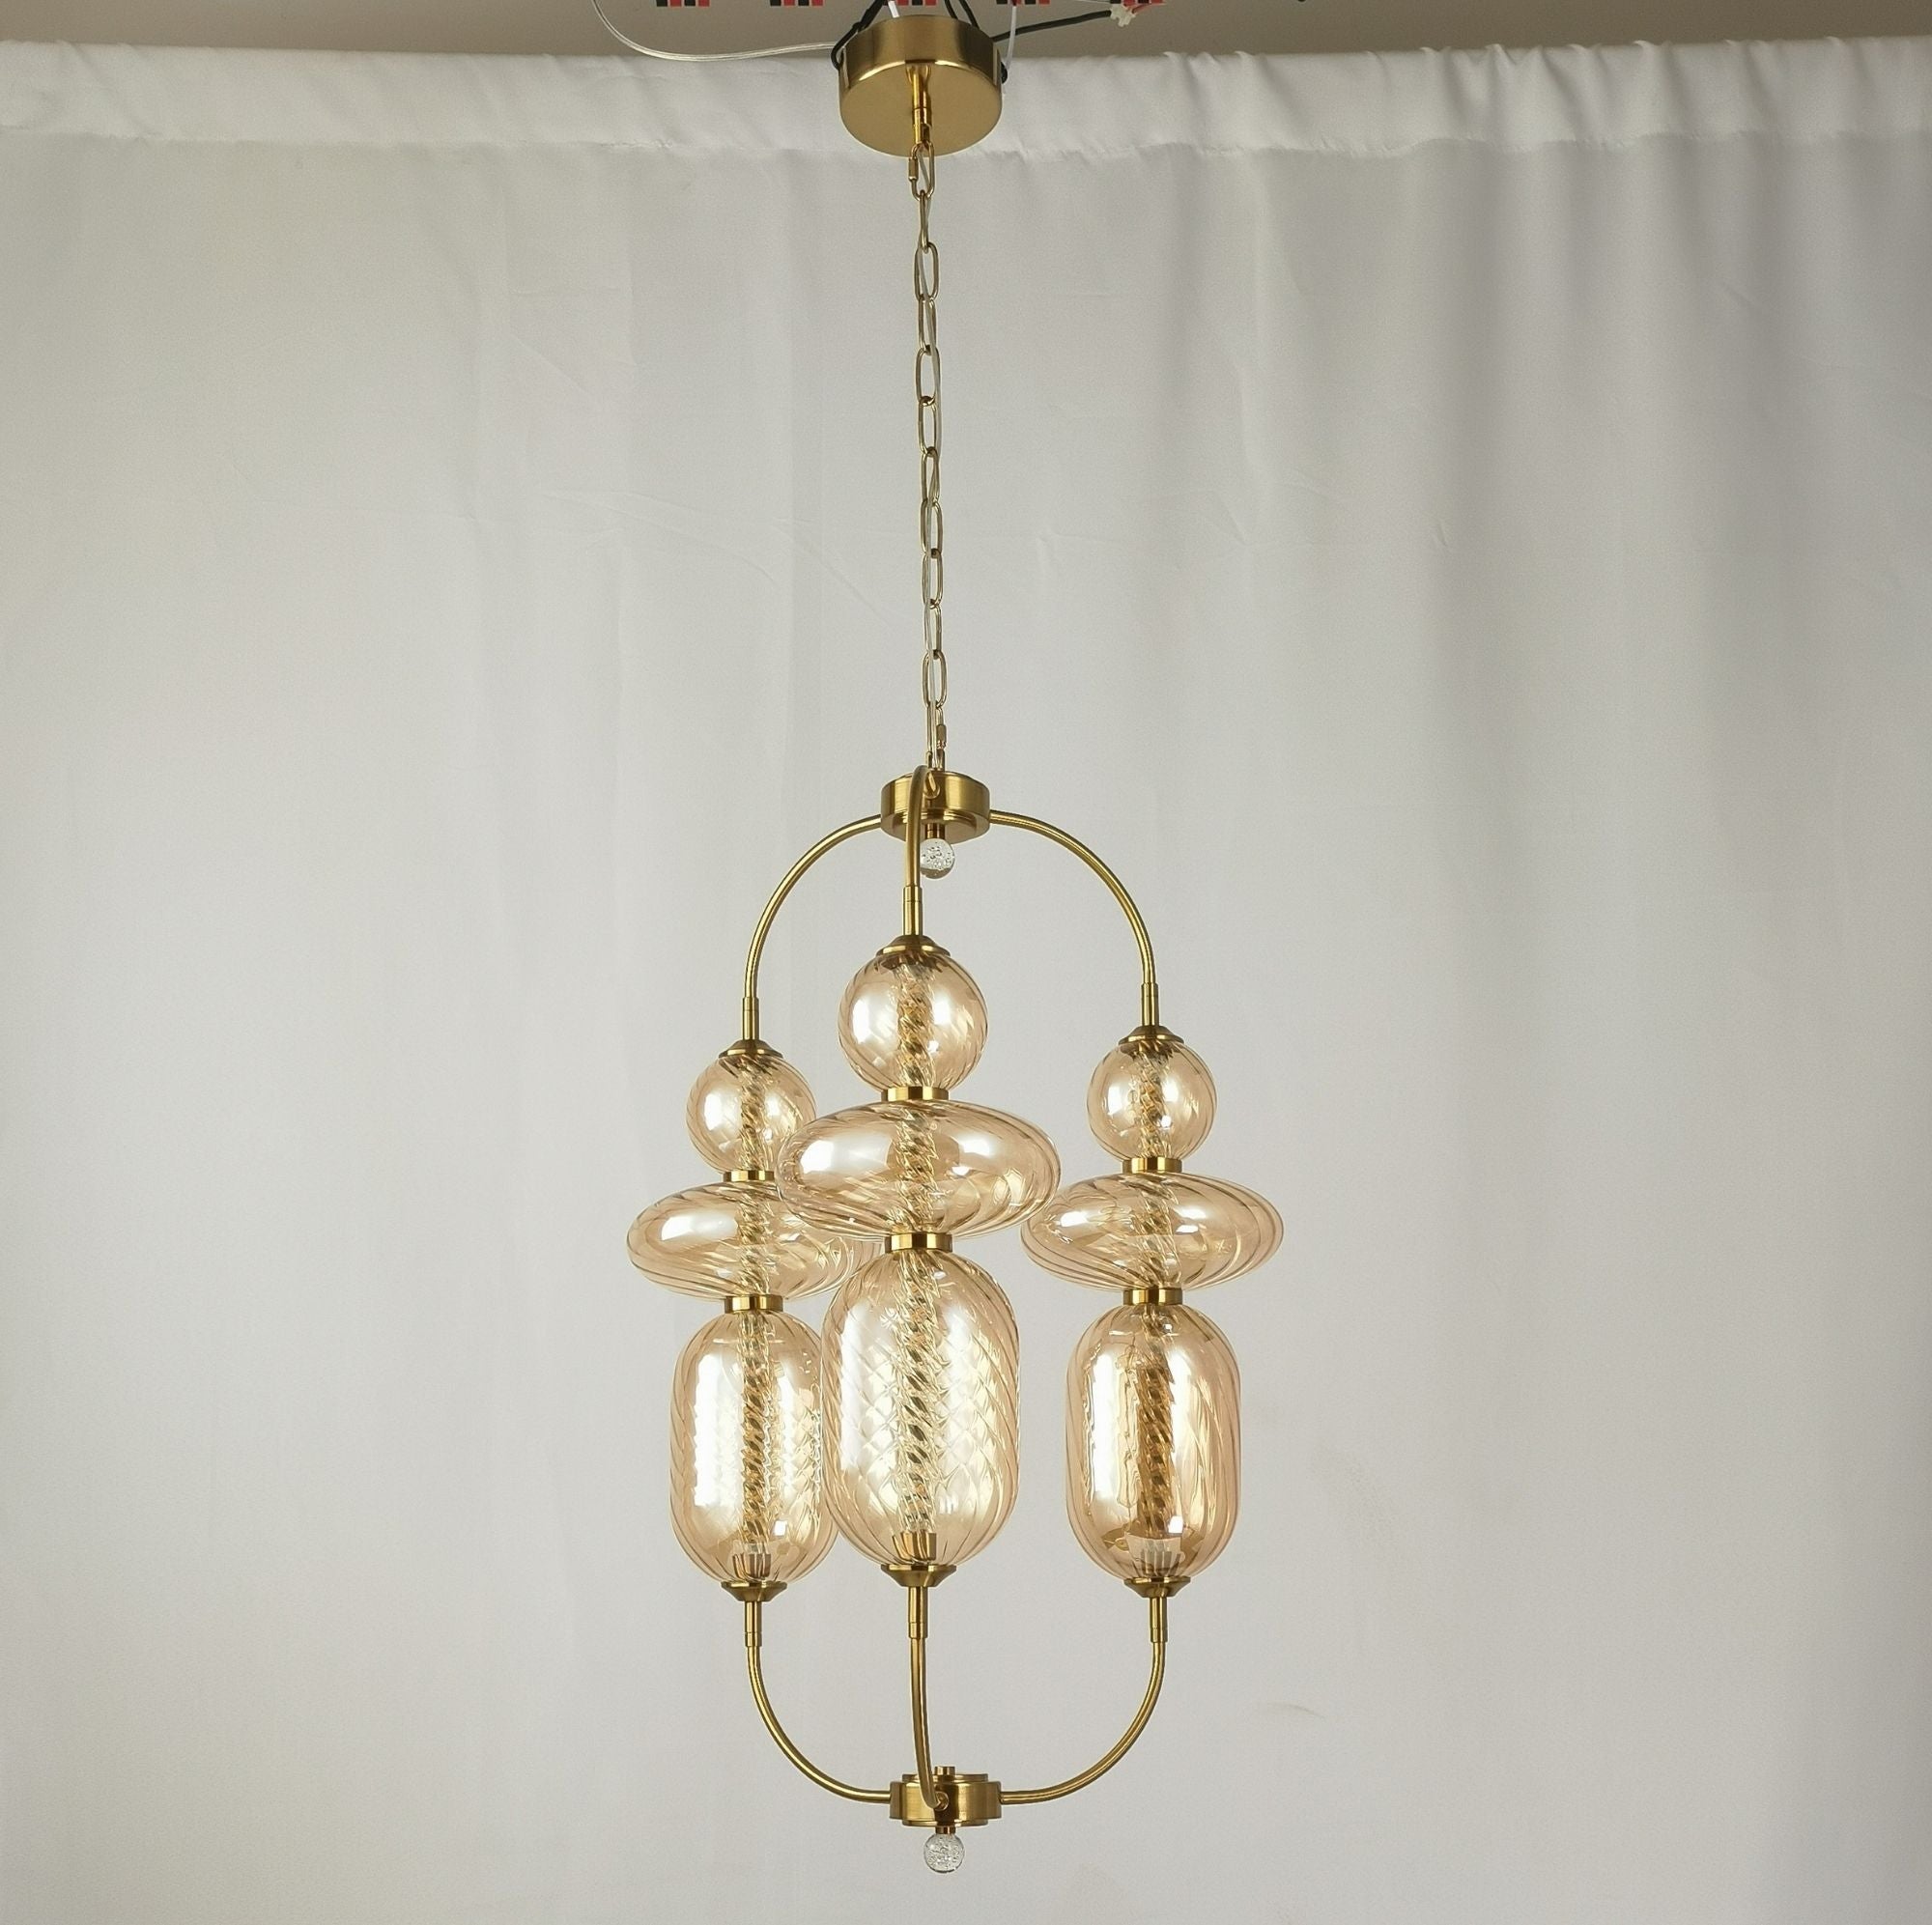 A1893/2 Gold Hardware and Amber Glass Chandelier